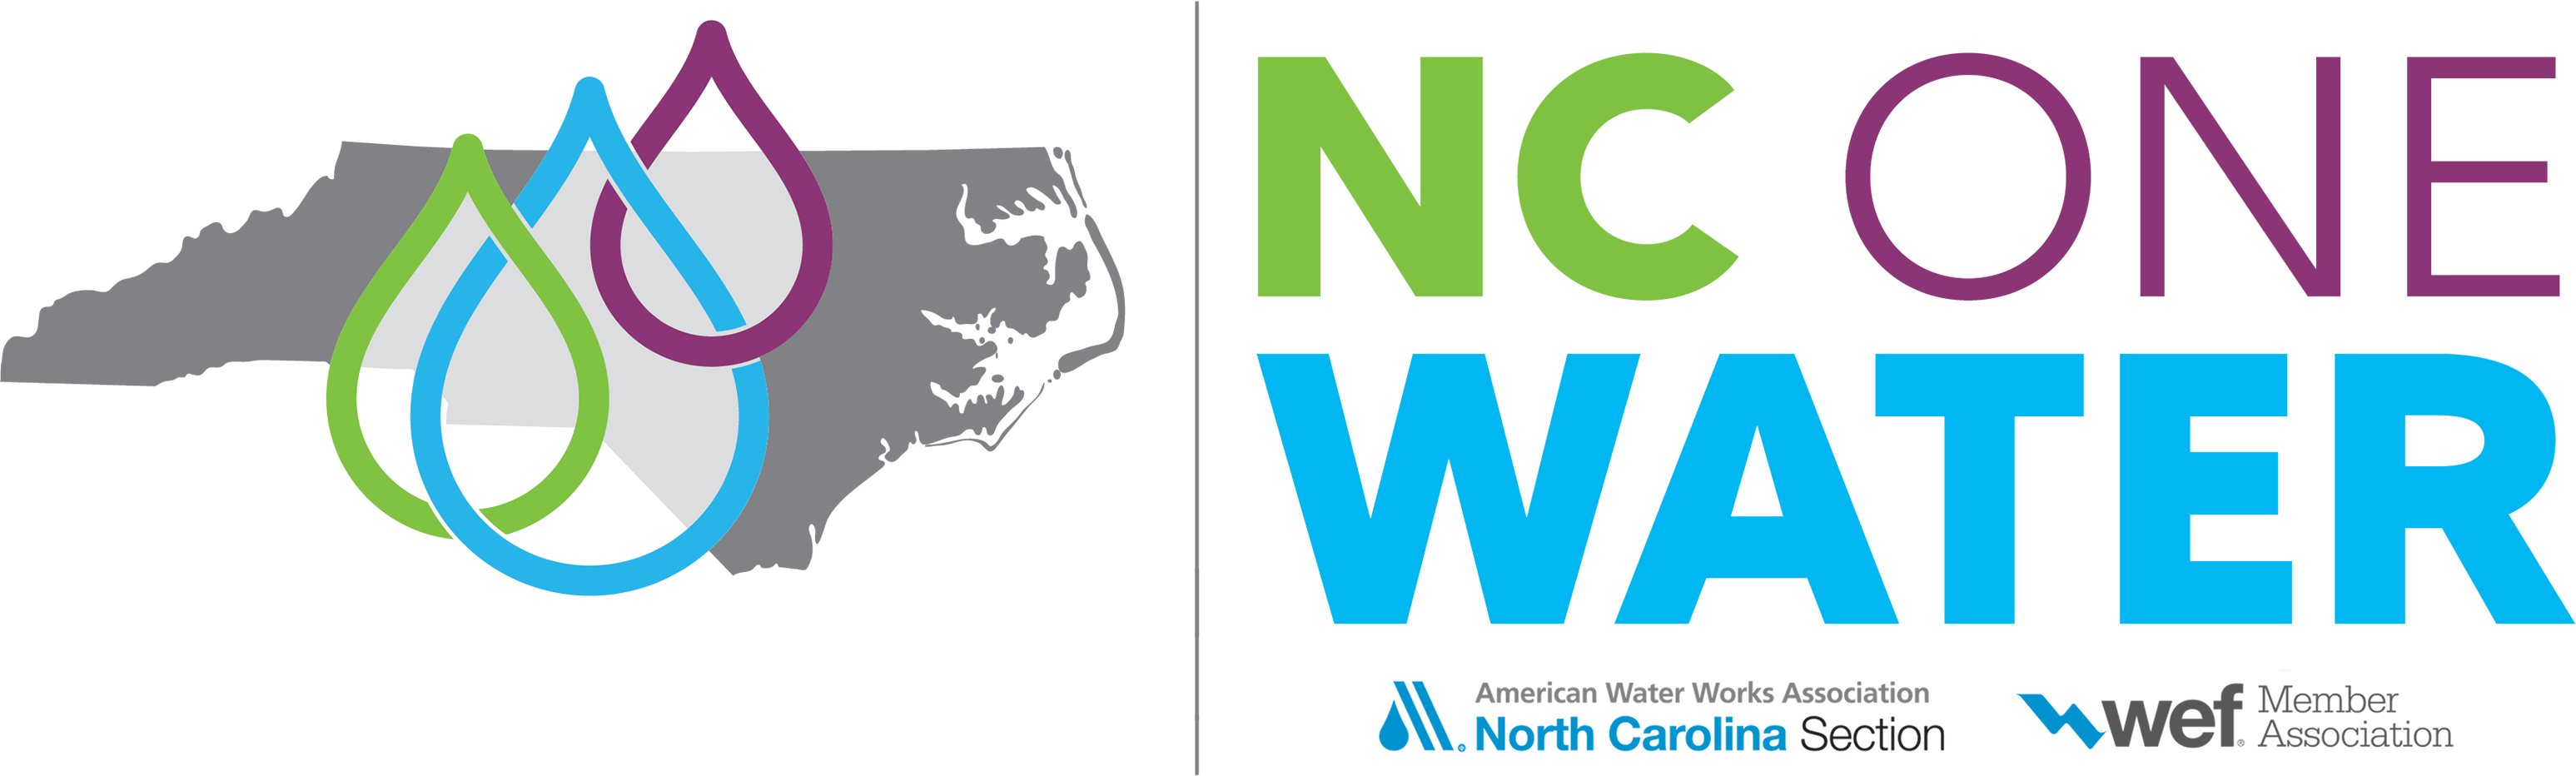 NC One Water logo.png